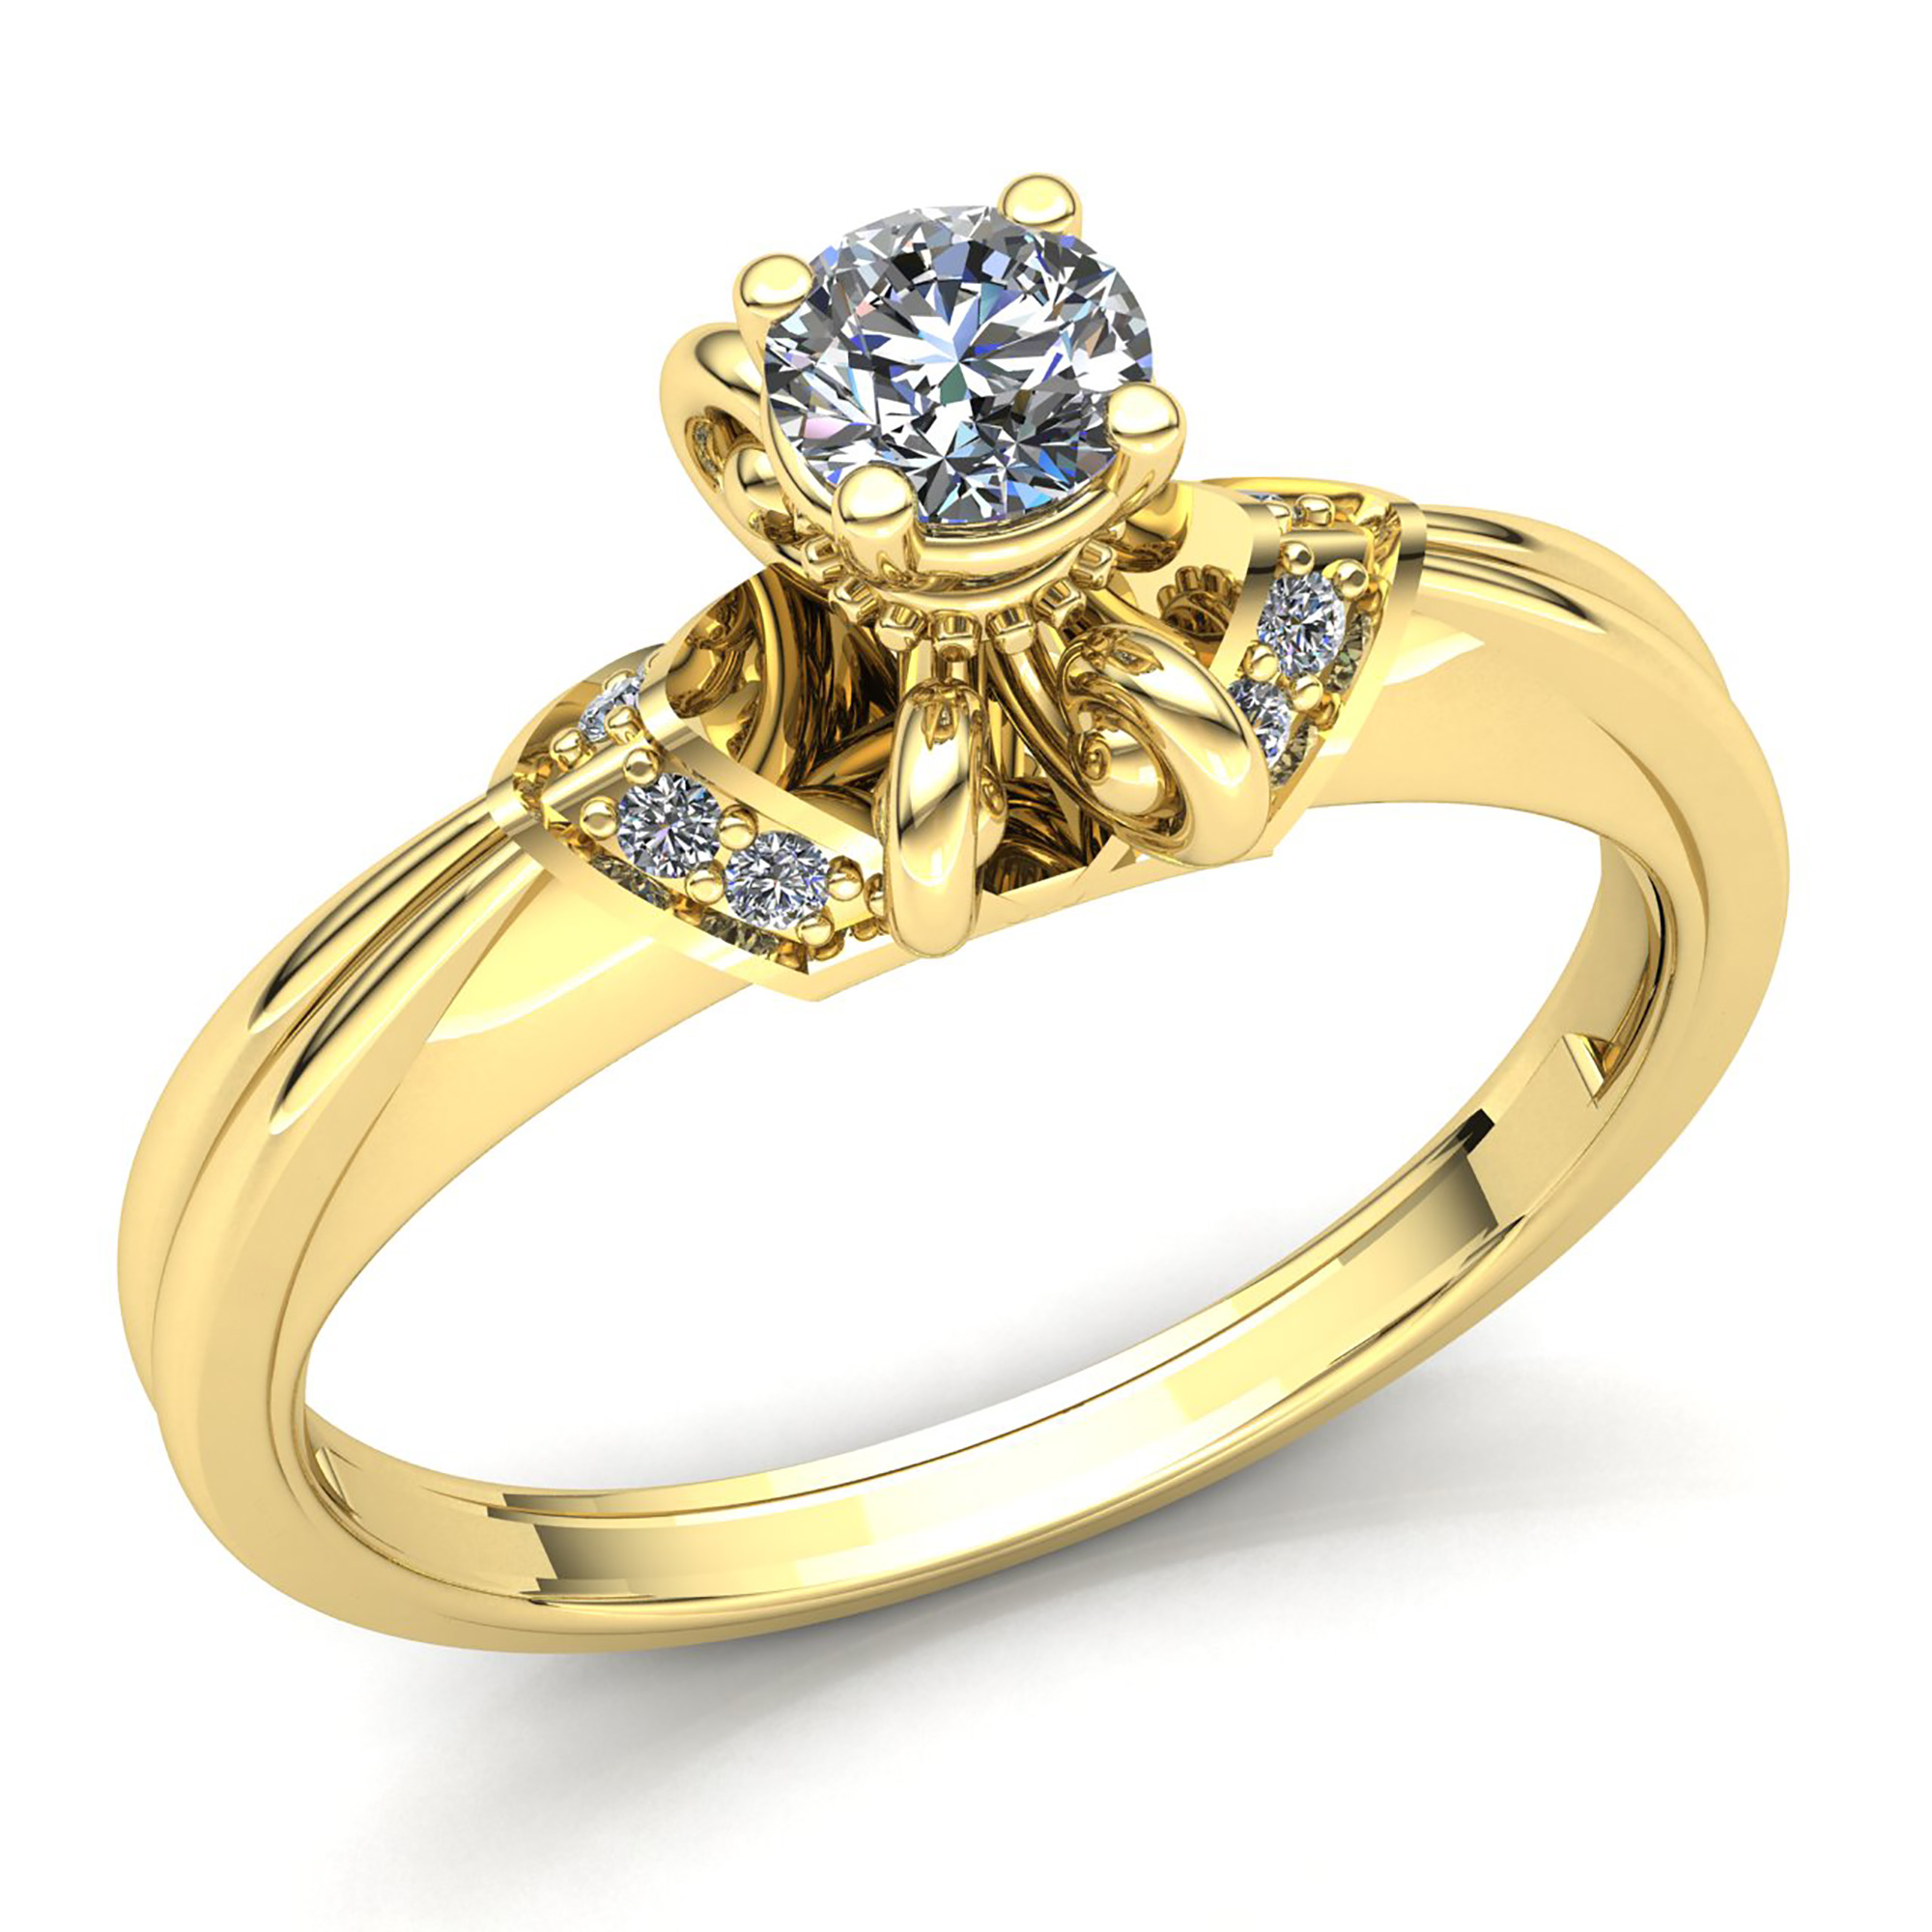 Unusual gold engagement rings for women  in jeddah 